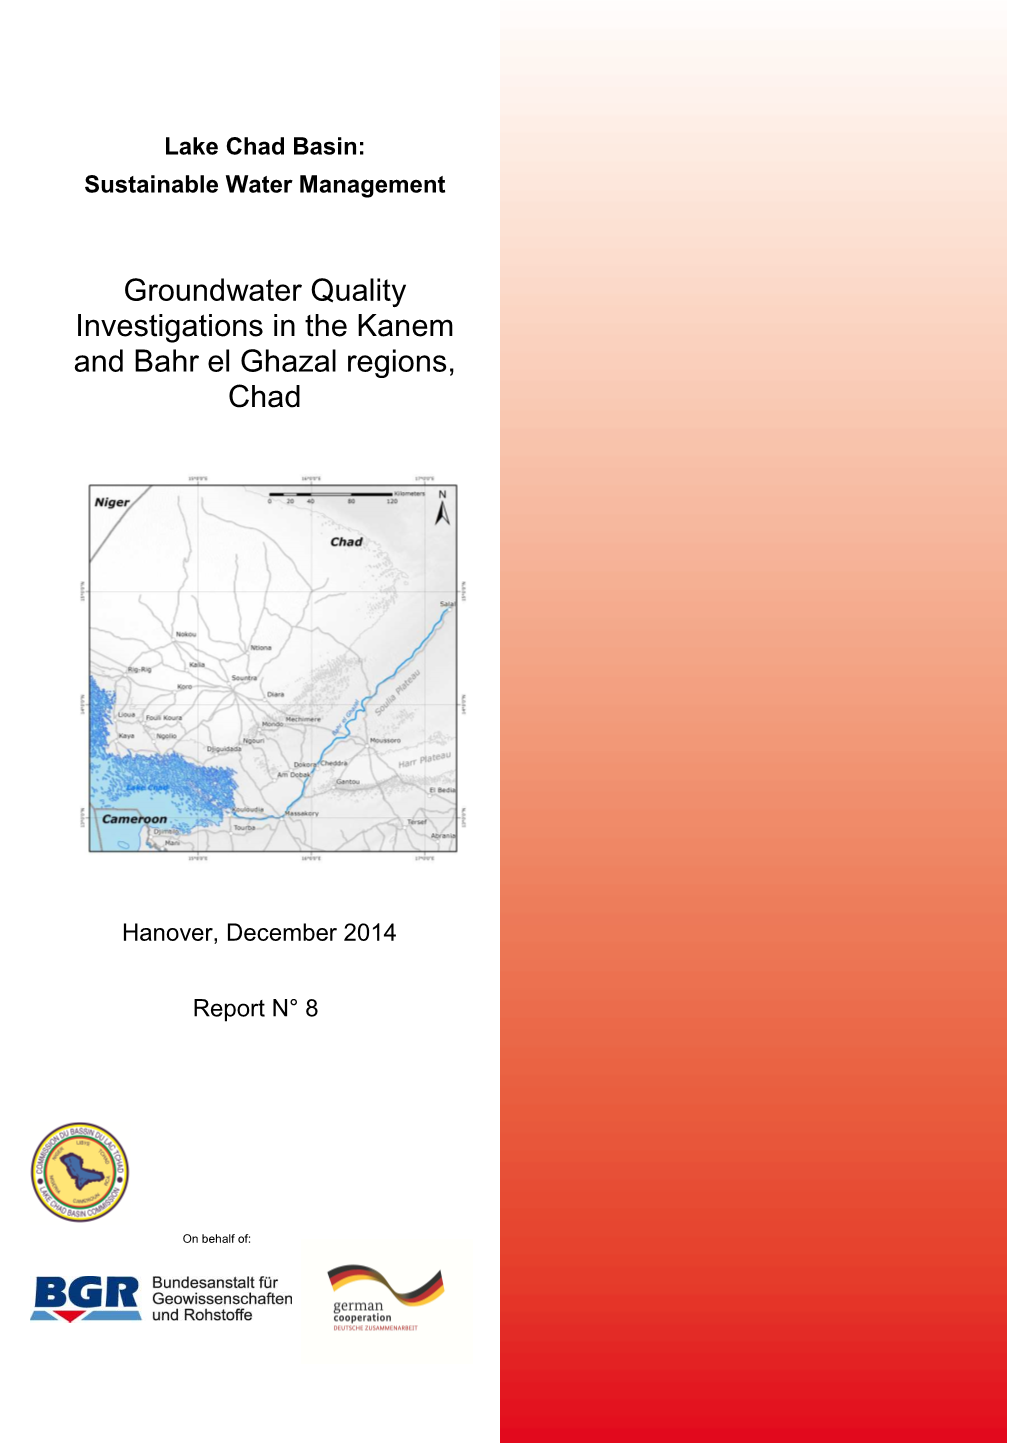 Groundwater Quality Investigations in the Kanem and Bahr El Ghazal Regions, Chad